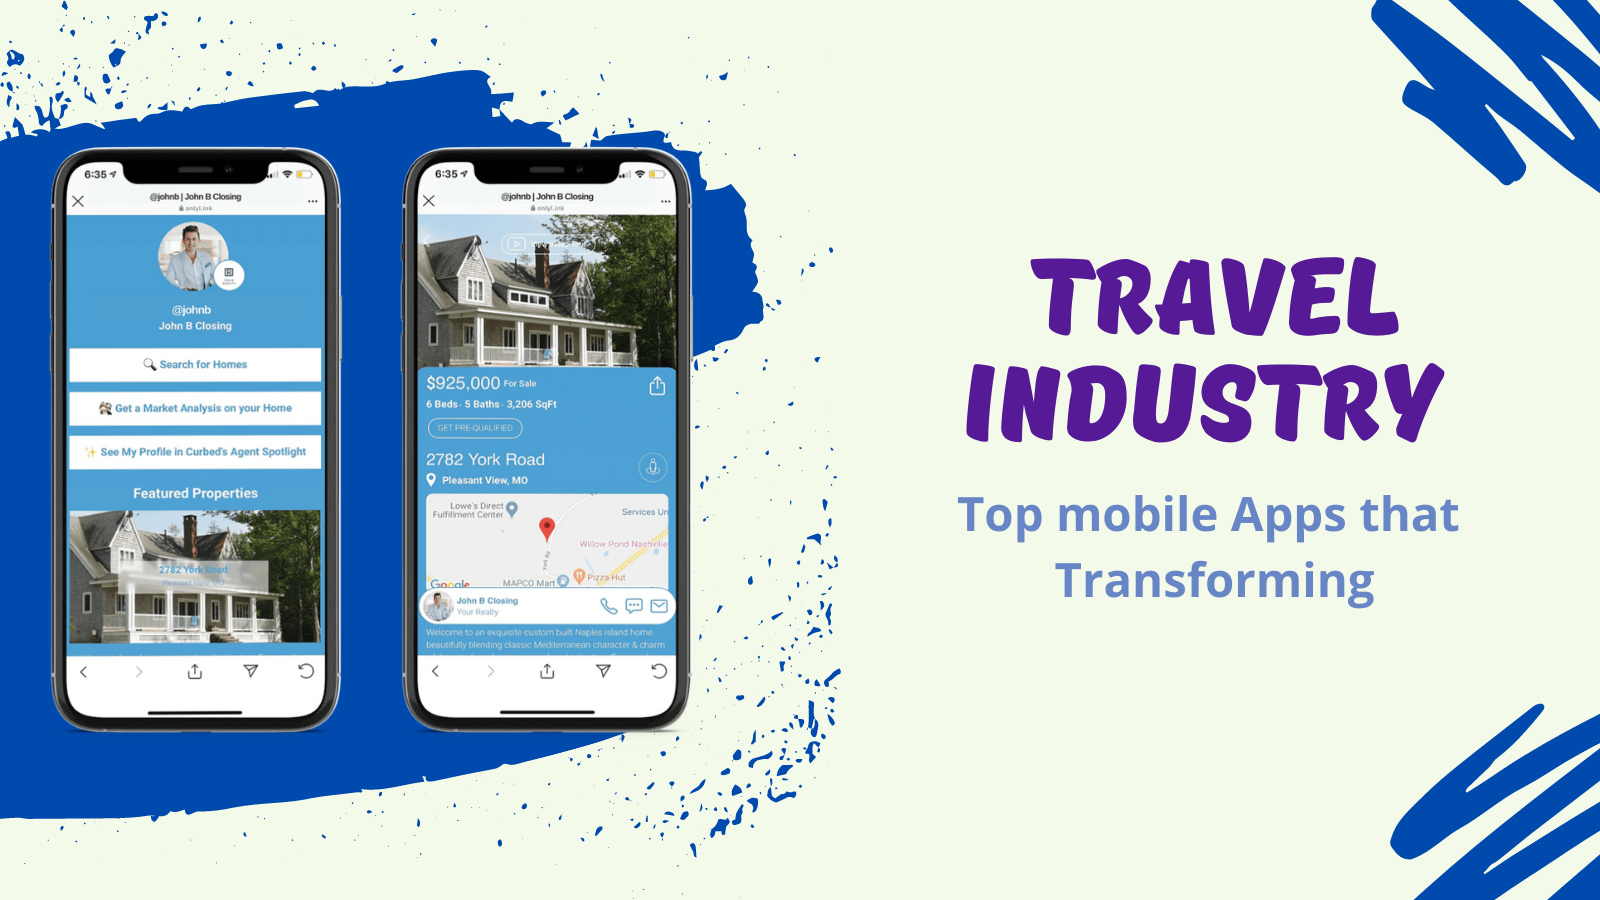 Top mobile Apps that Transforming the Travel Industry in 2021